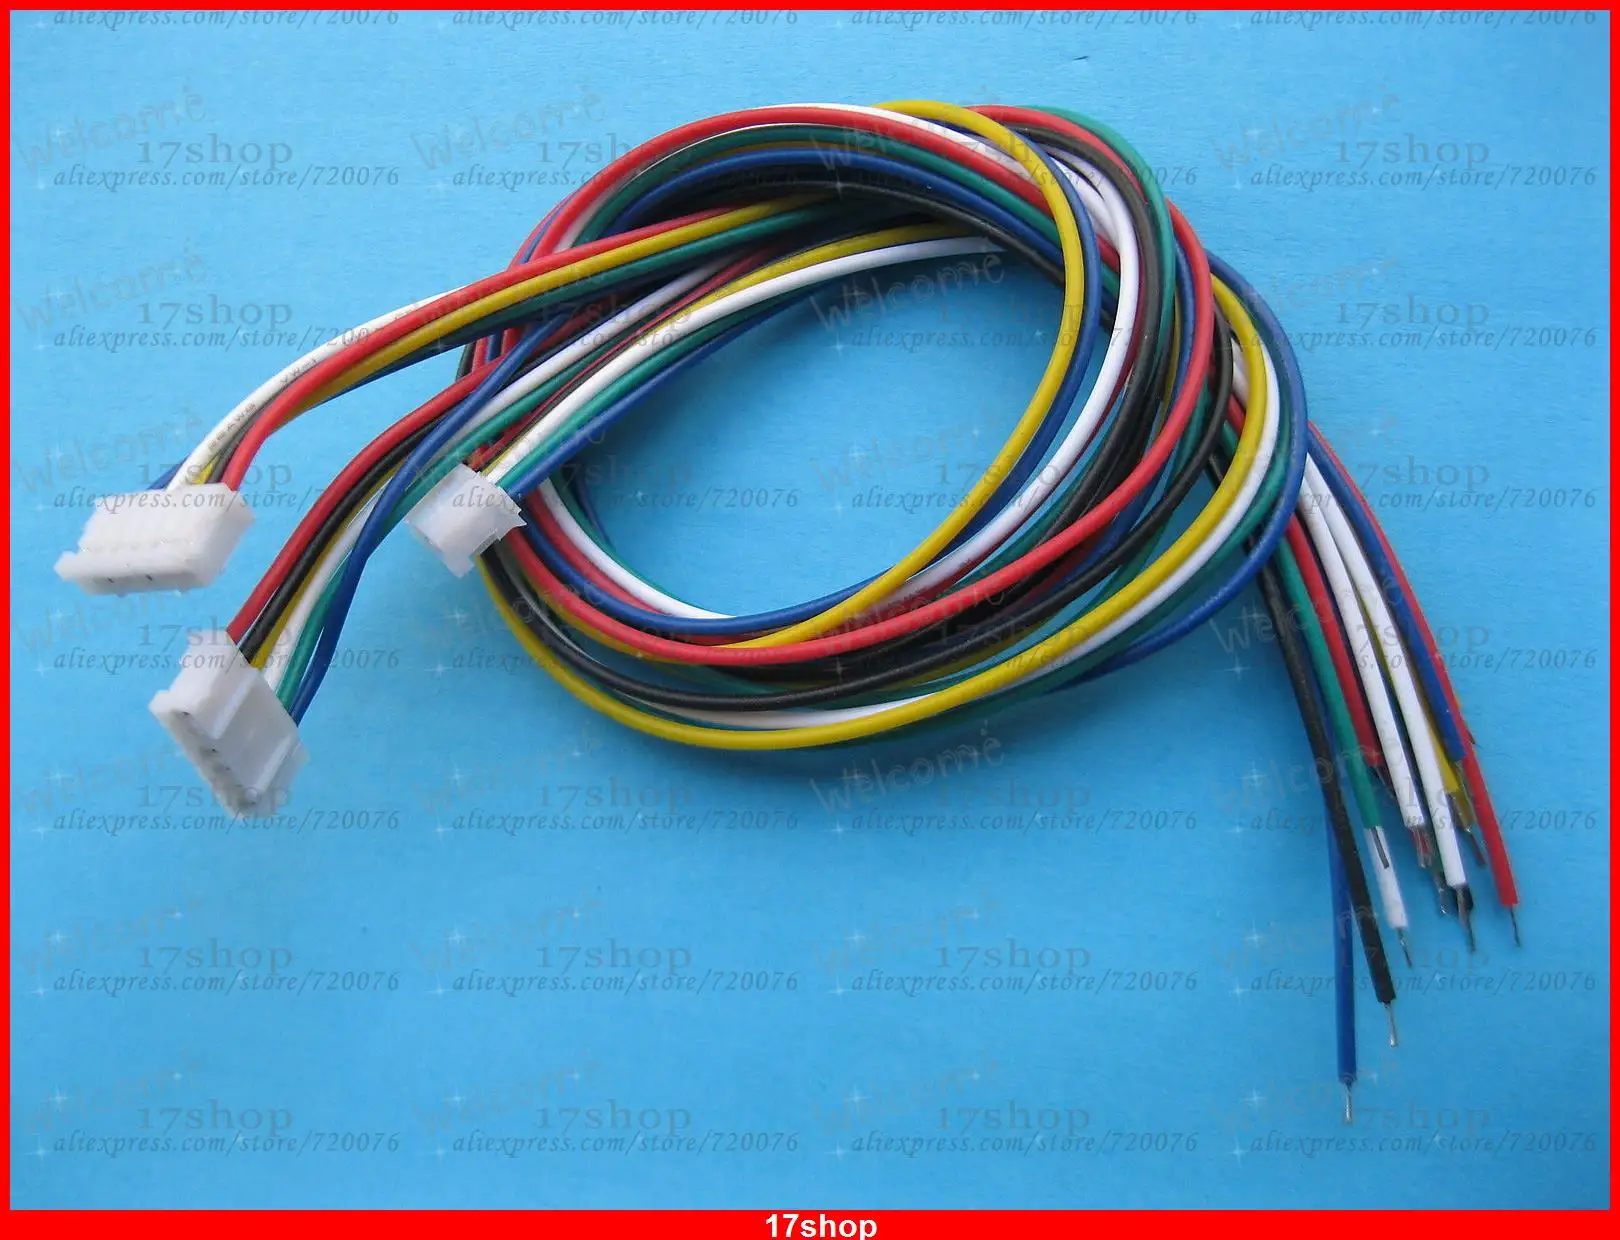 

60 pcs PH 2.0mm 6 Pin Female Polarized Connector with 26AWG 11.inch 300mm Leads